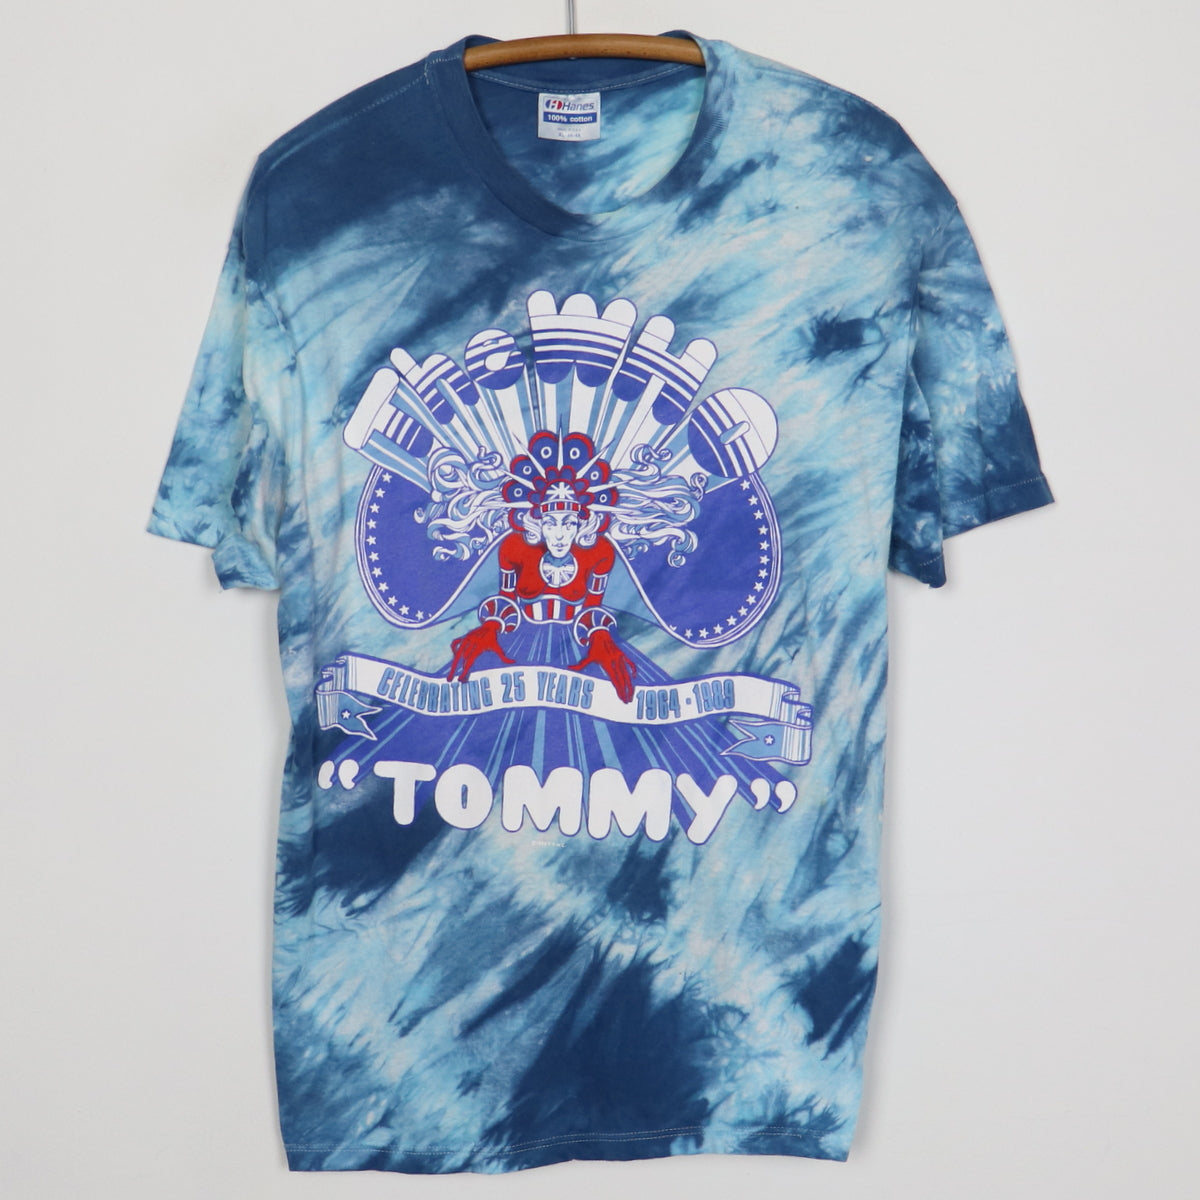 1989 The Who Tommy Tie Dye Shirt